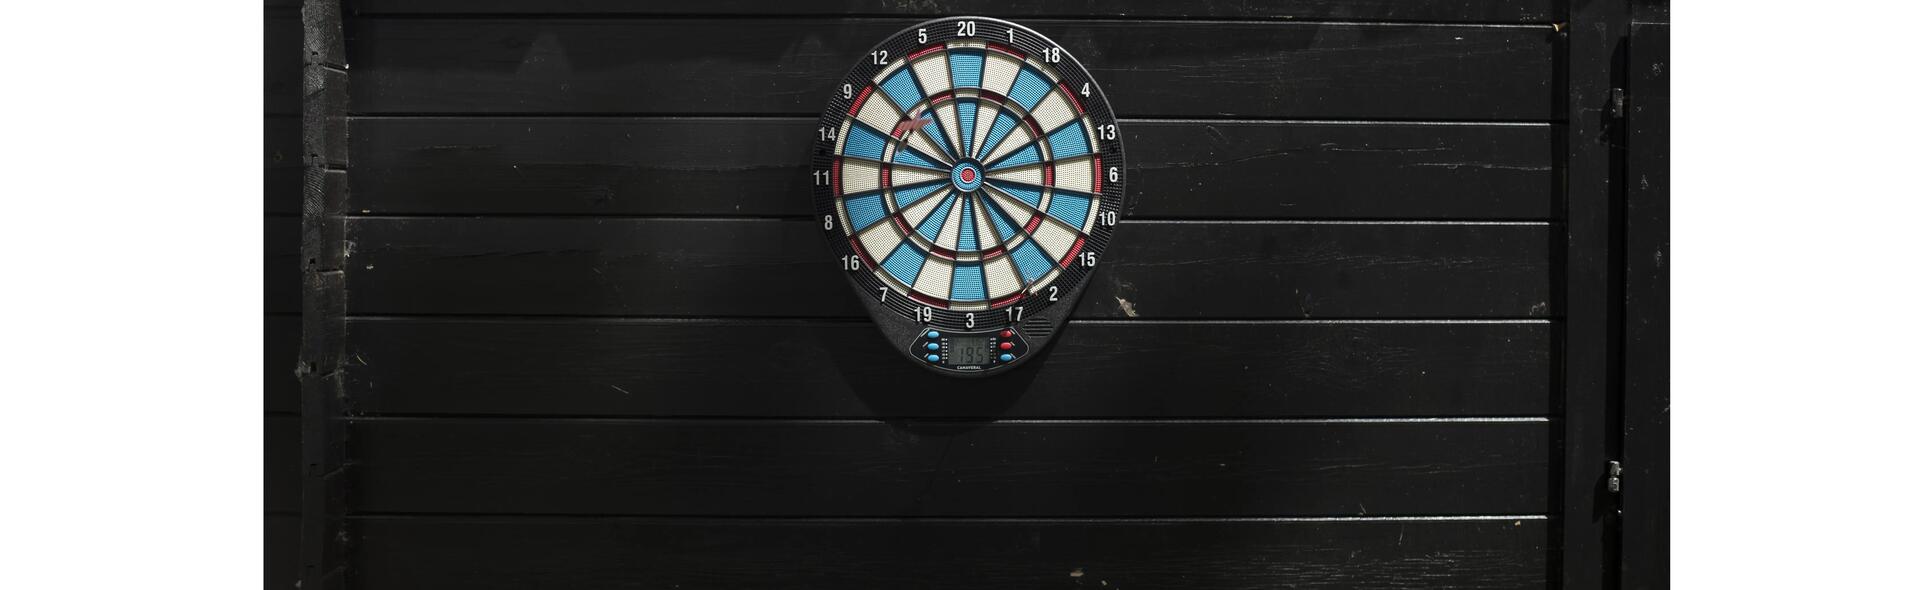 How To Count Points On A Dart Board